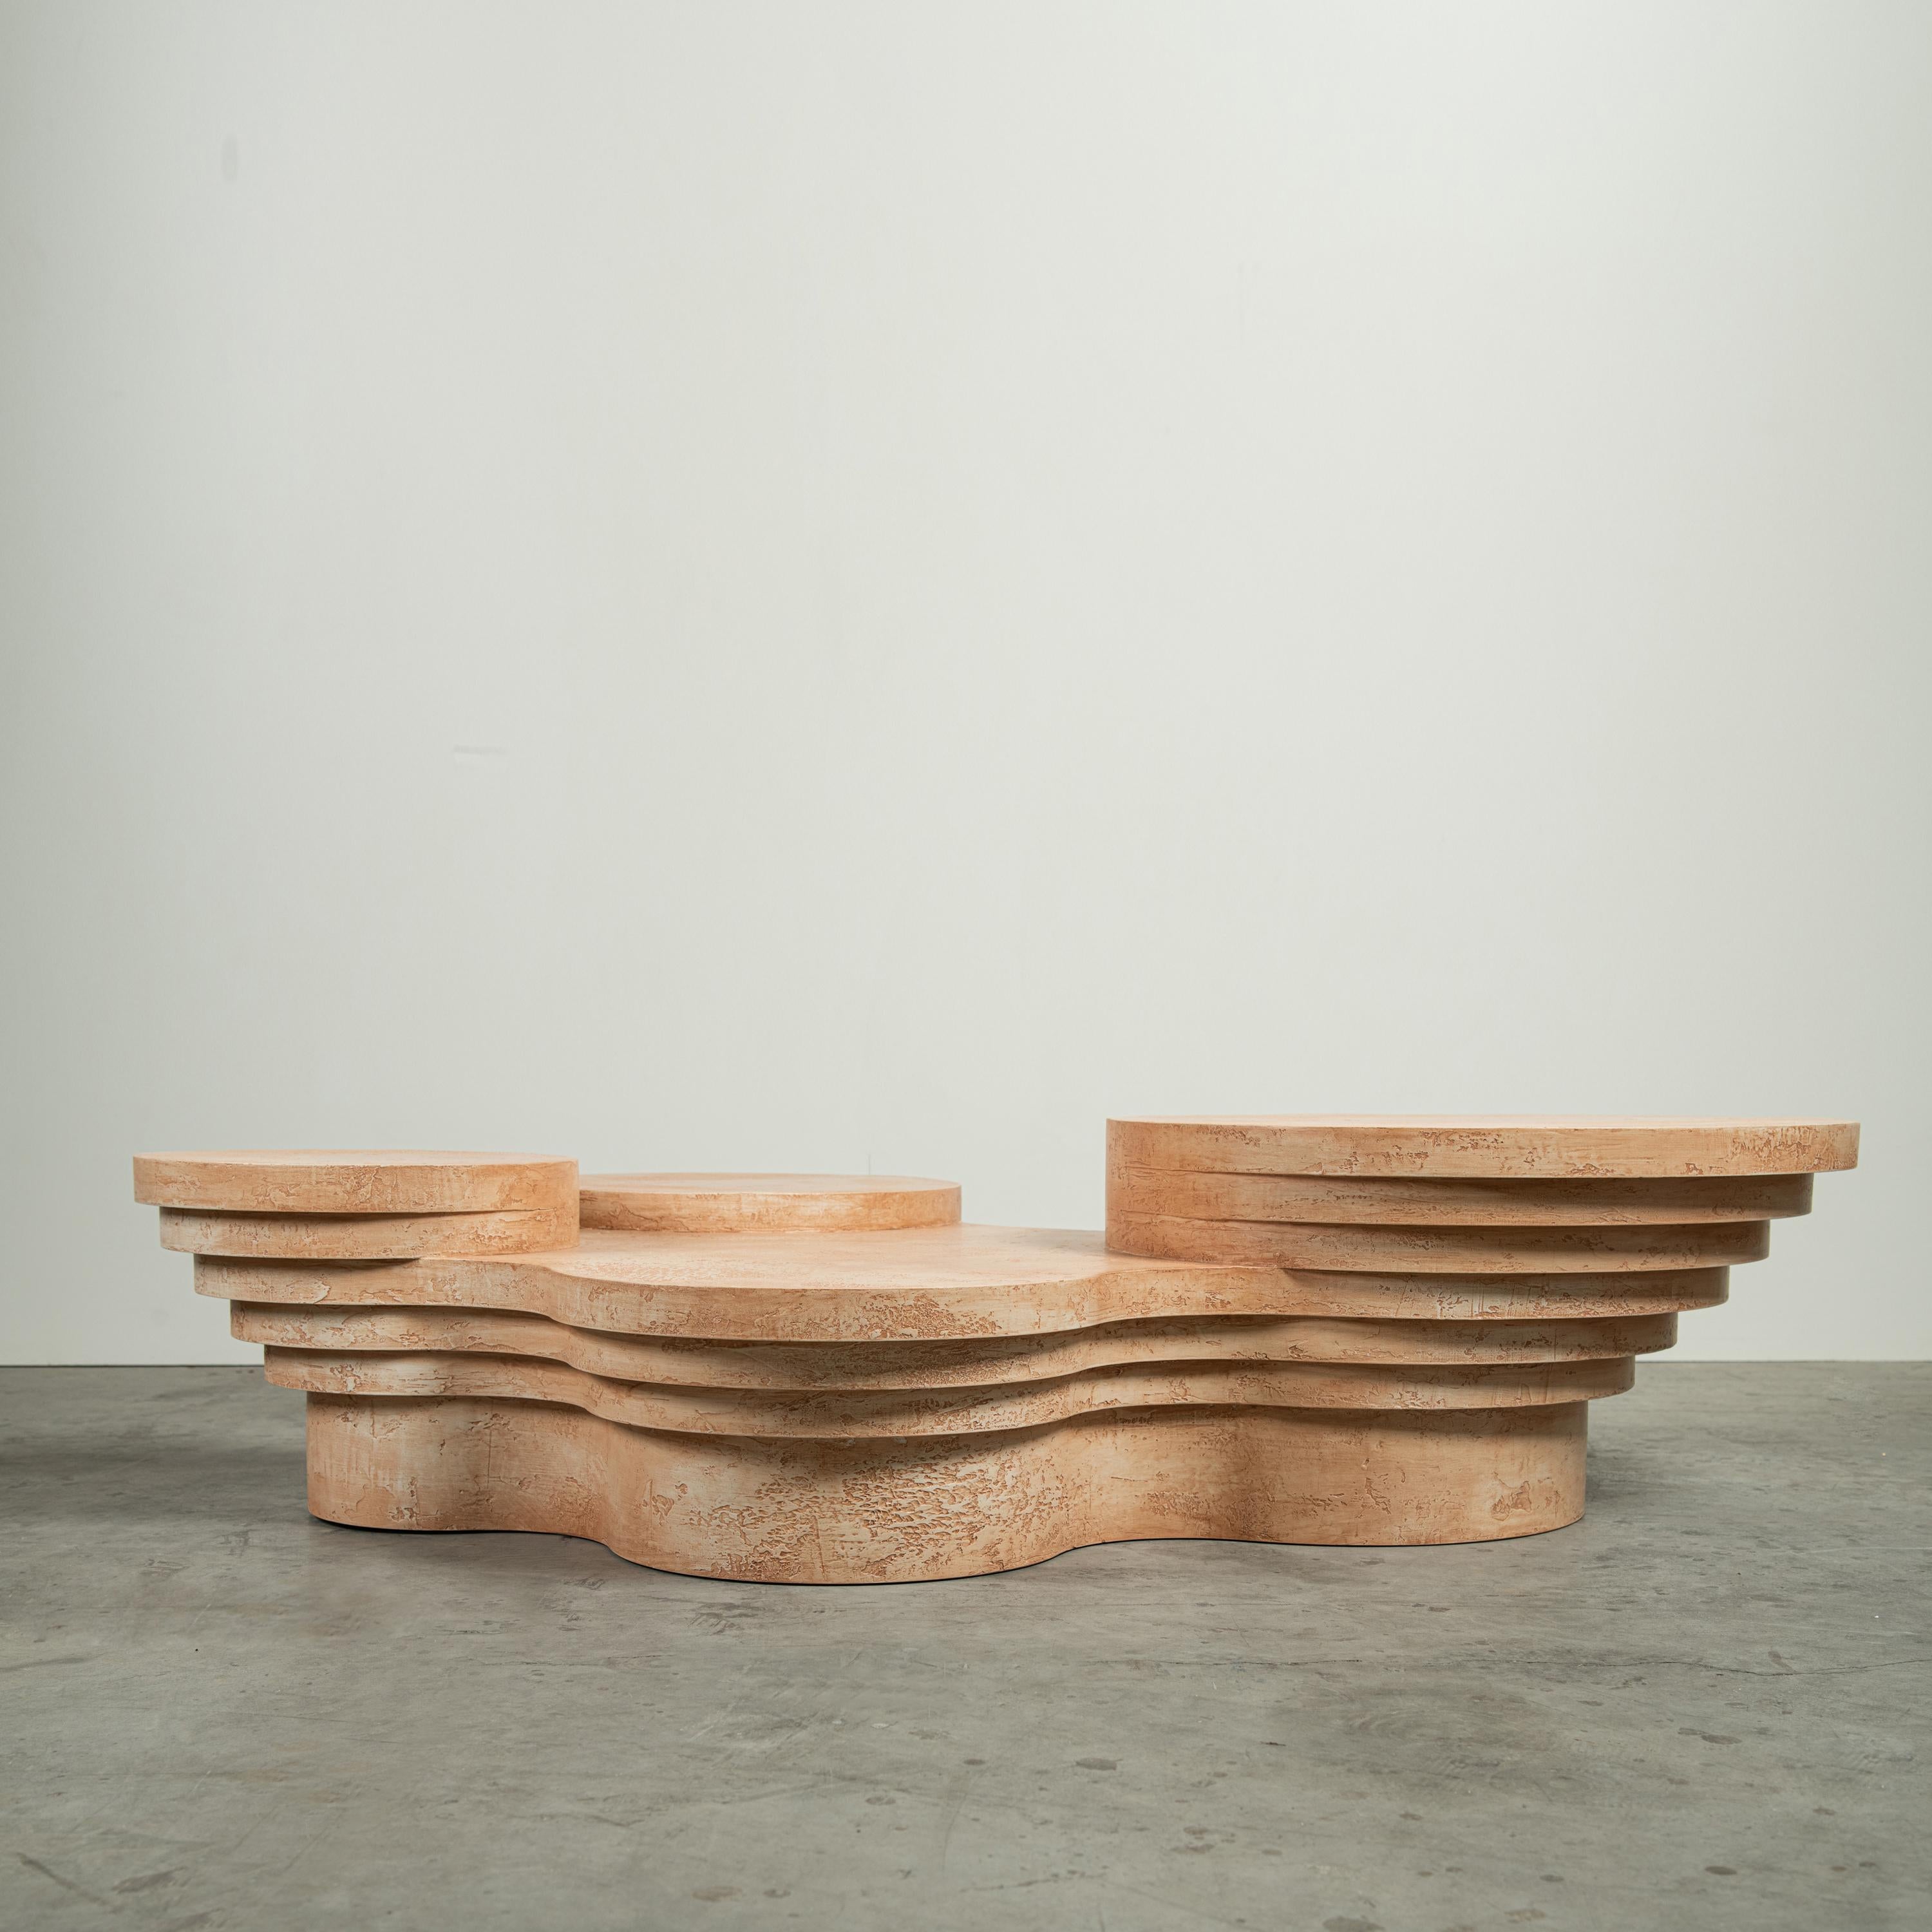 Slice Me Up sculptural coffee table by Pietro Franceschini
Sold exclusively by Galerie Philia
Manufacturer: We Do
Dimensions: W 160 x L 120 x H 36 cm
Materials: Plaster (different finishes).


Pietro Franceschini is an architect and designer